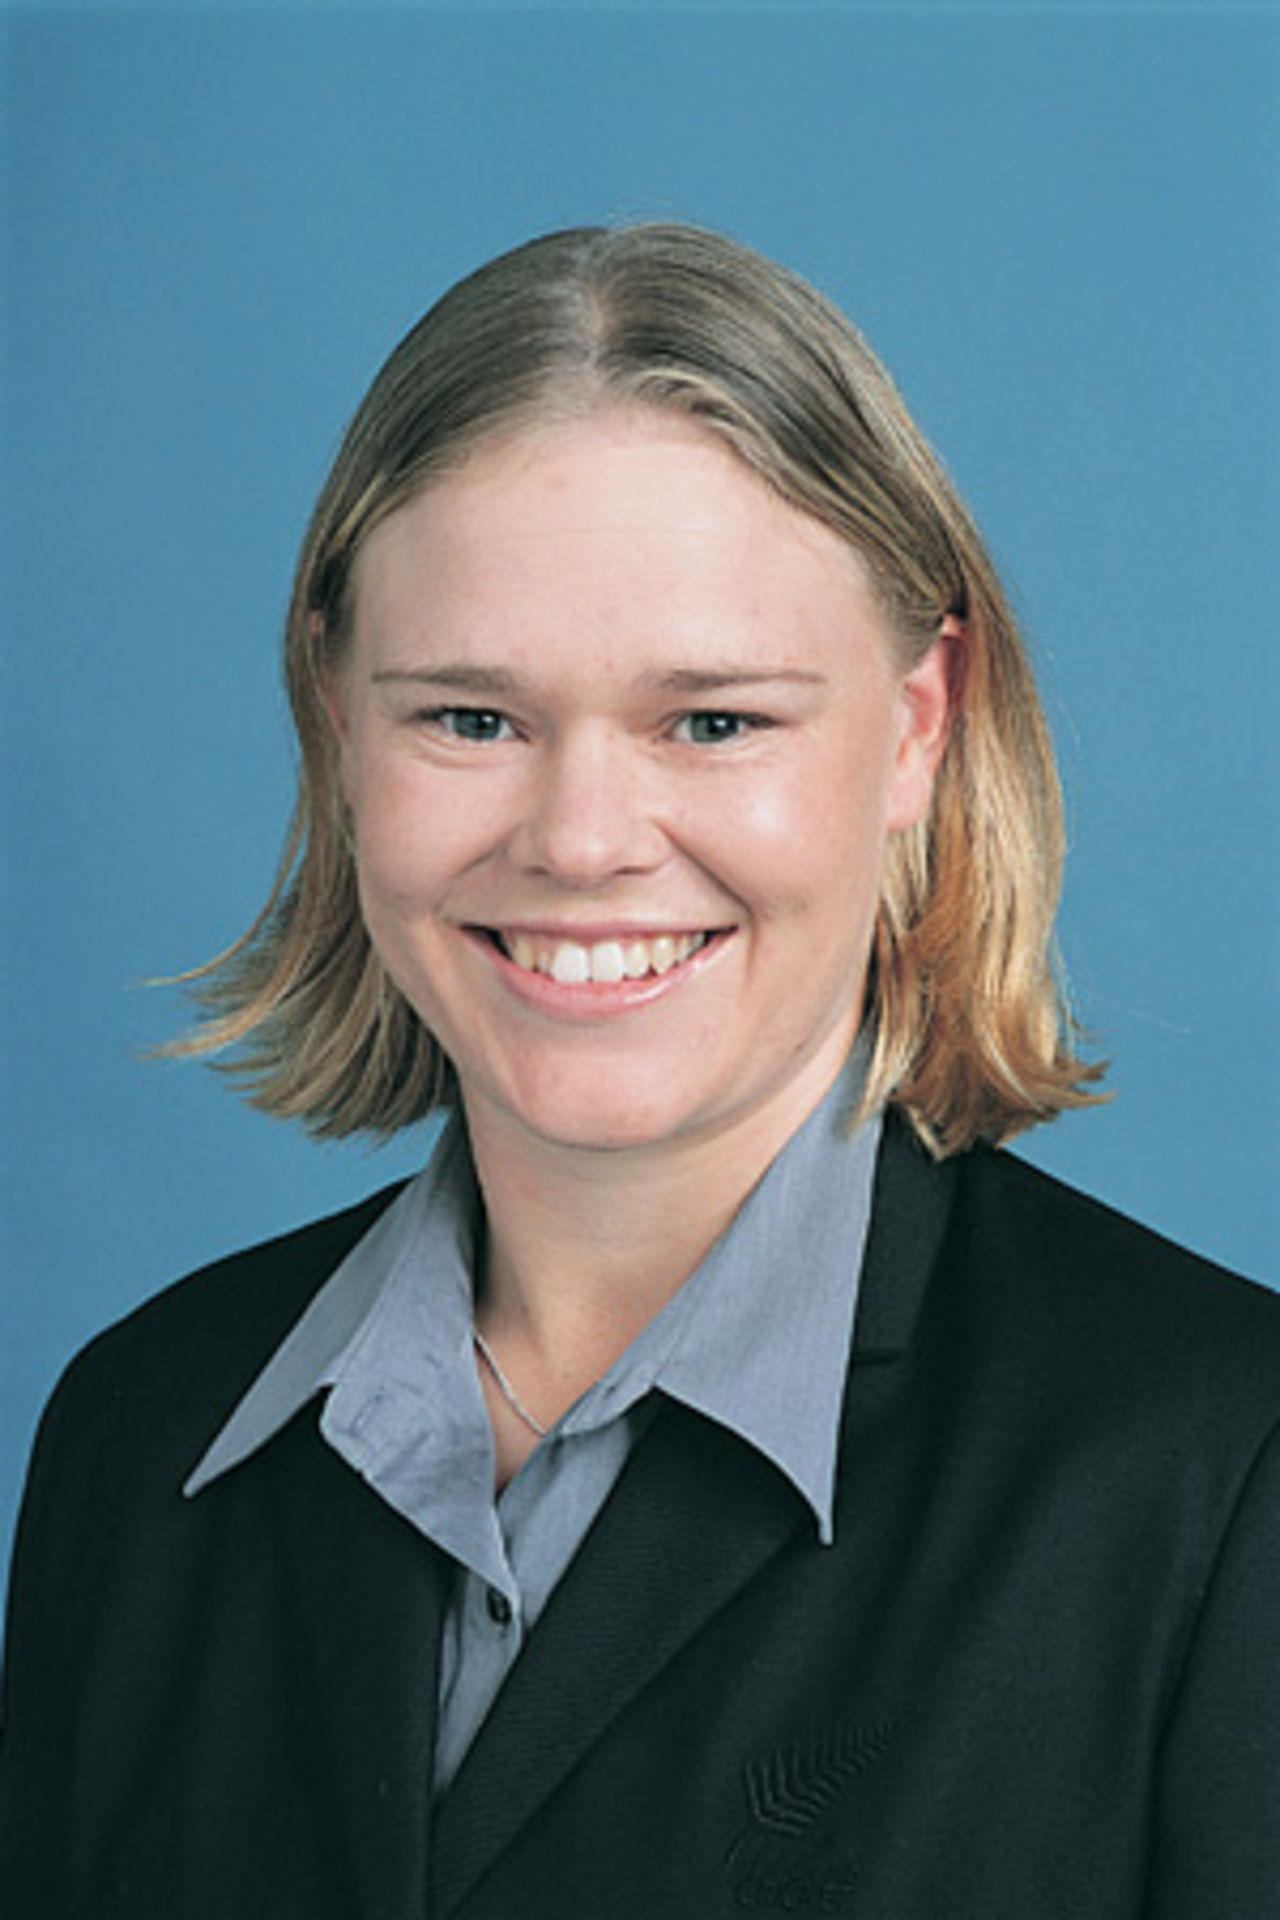 Portrait of Kate Pulford - New Zealand women's player in the 2002 season.